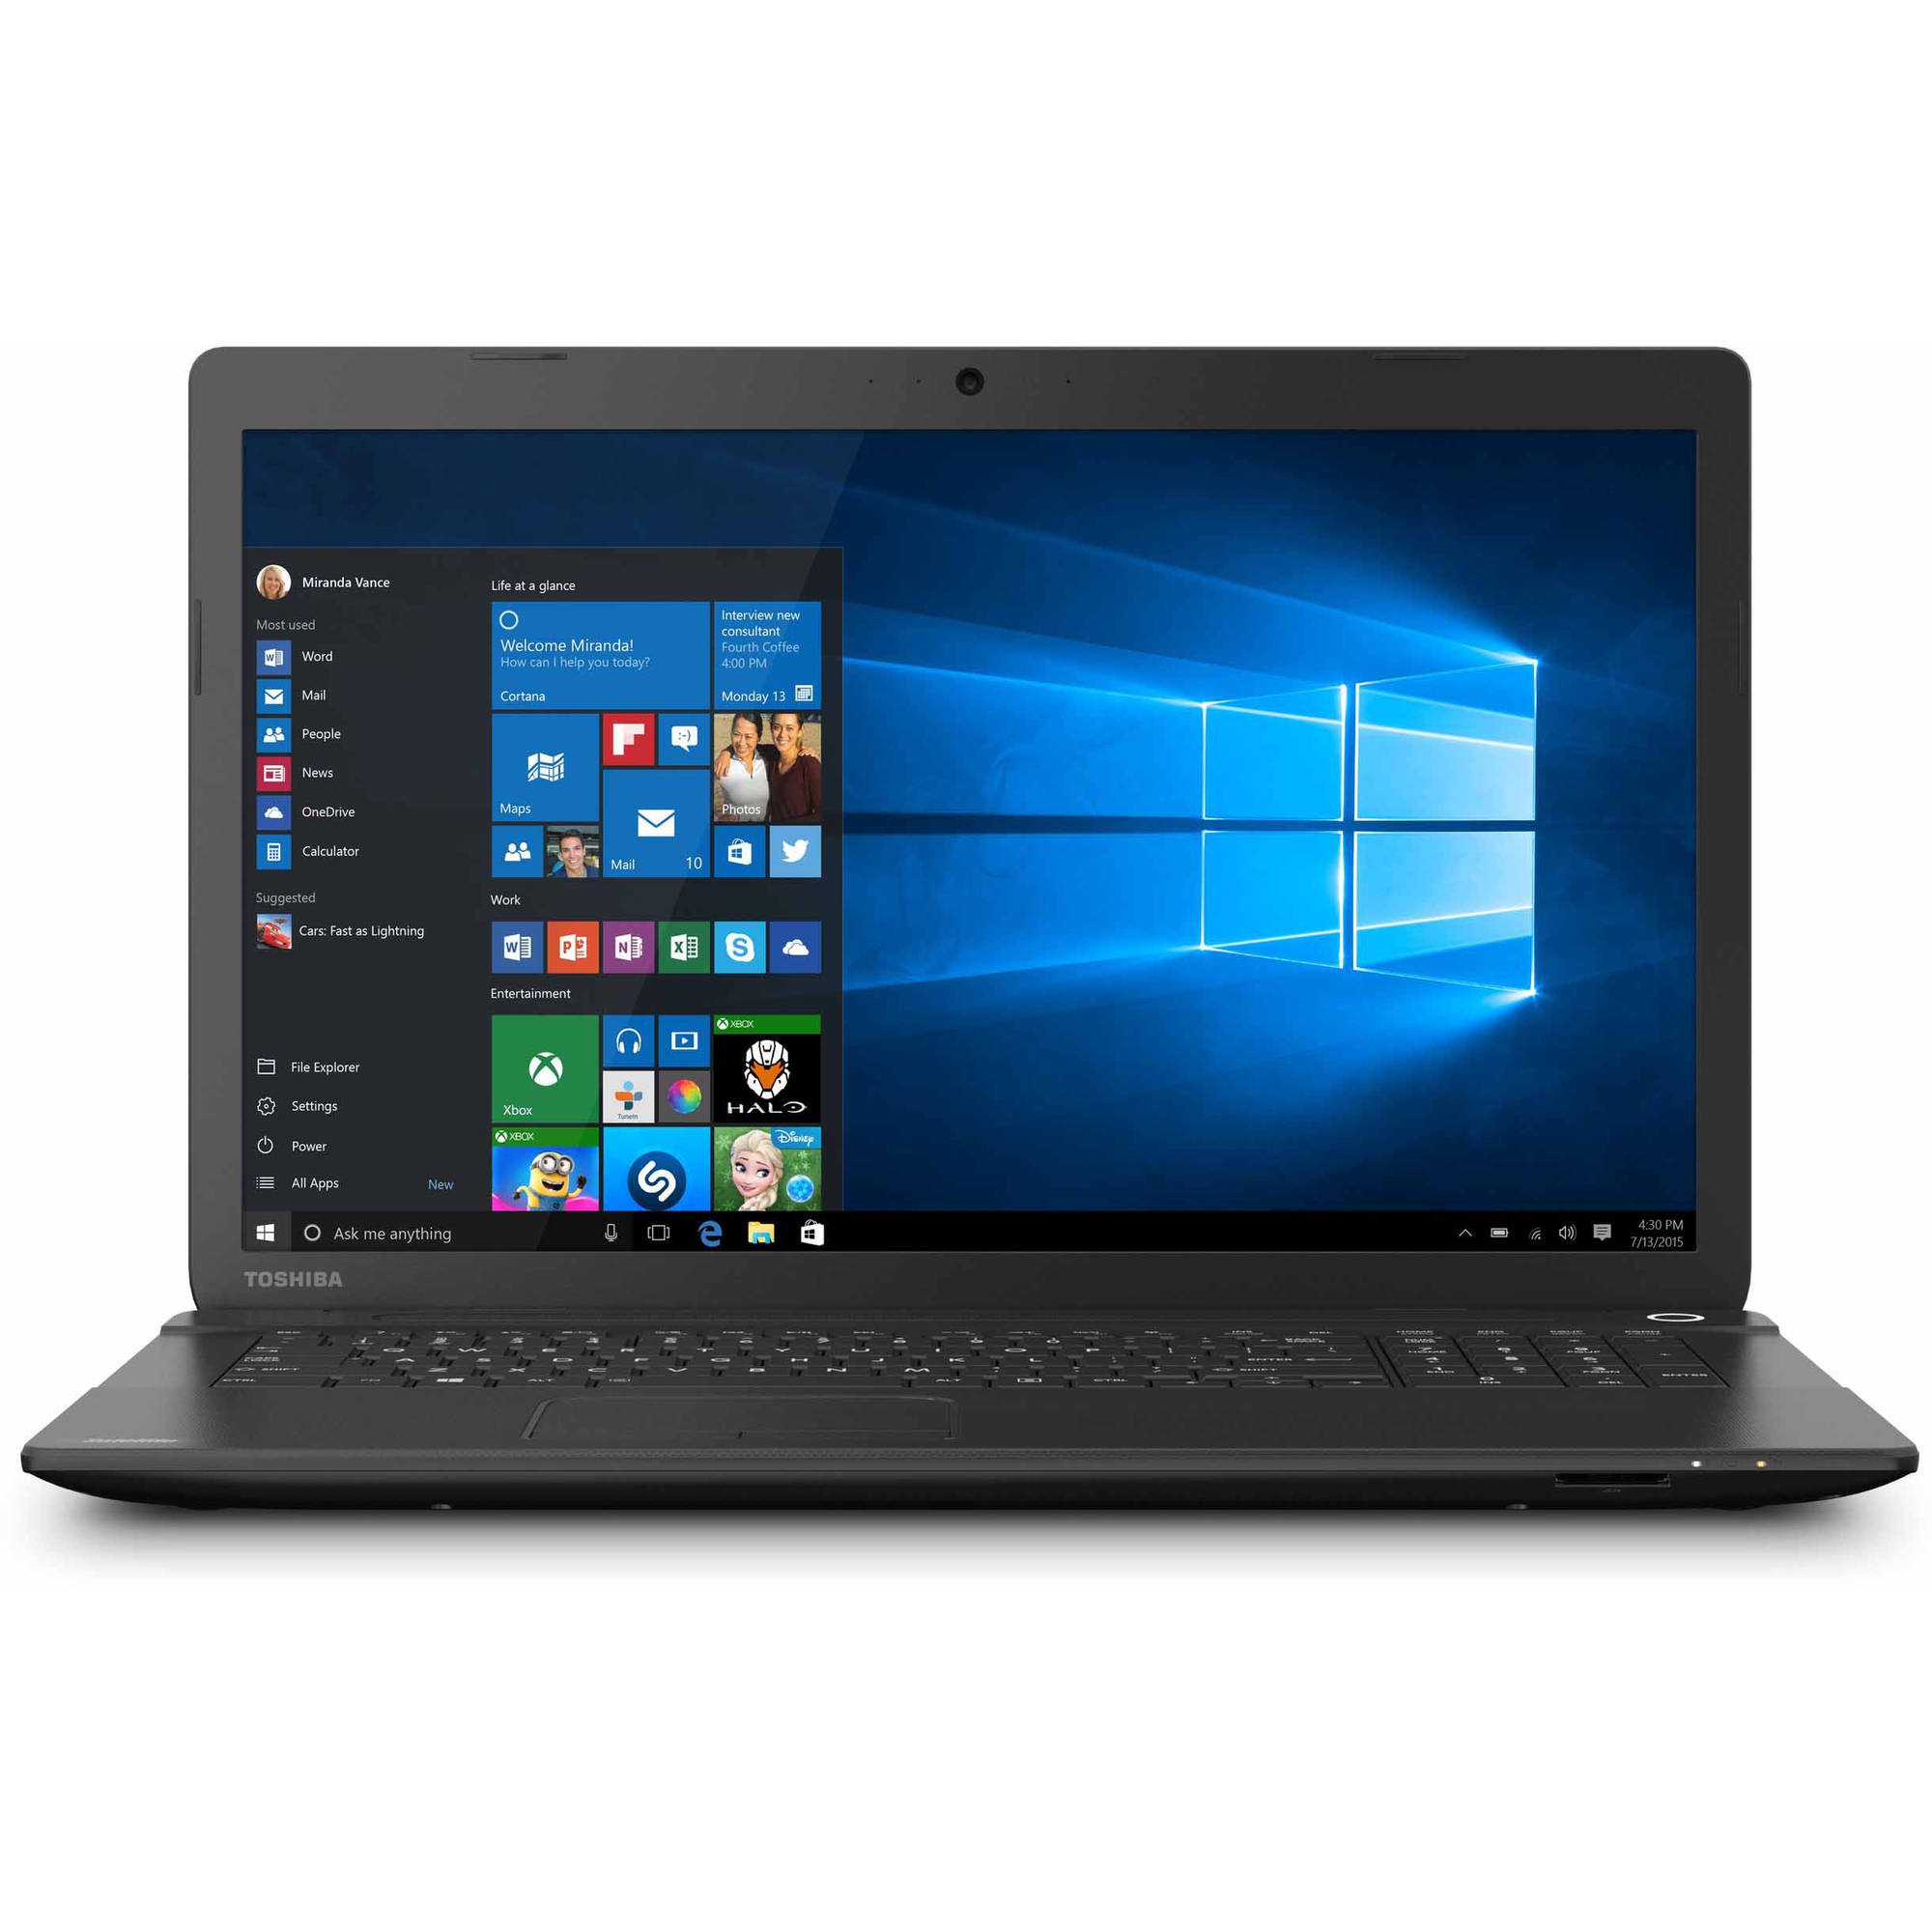 Toshiba Satellite C75D-B7320 - AMD A8 - 6410 / up to 2.4 GHz - Windows 10 Home - Radeon R5 - 6 GB RAM - 750 GB HDD - DVD SuperMulti - 17.3" 1600 x 900 (HD+) - textured resin in jet black - image 2 of 12